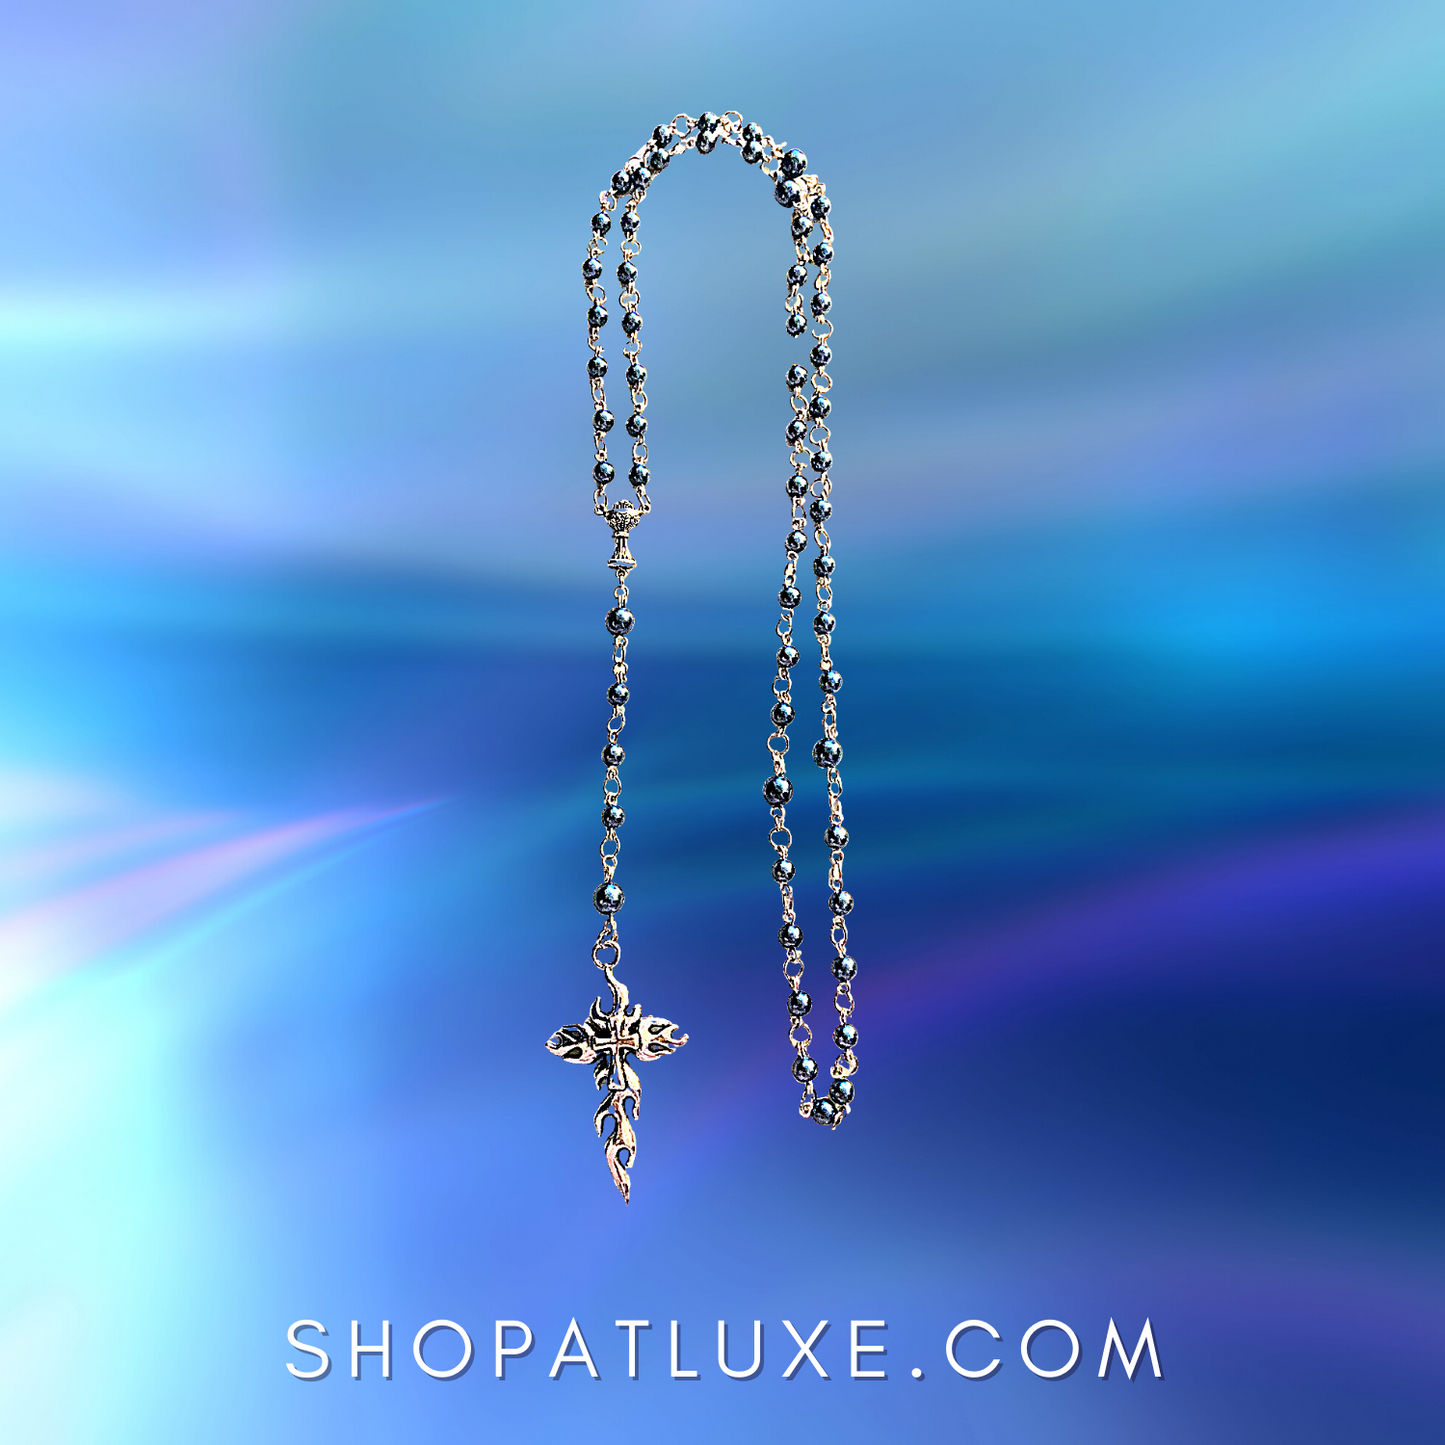 Sapphire Blue Beaded Rosary With Flaming Cross Pendant